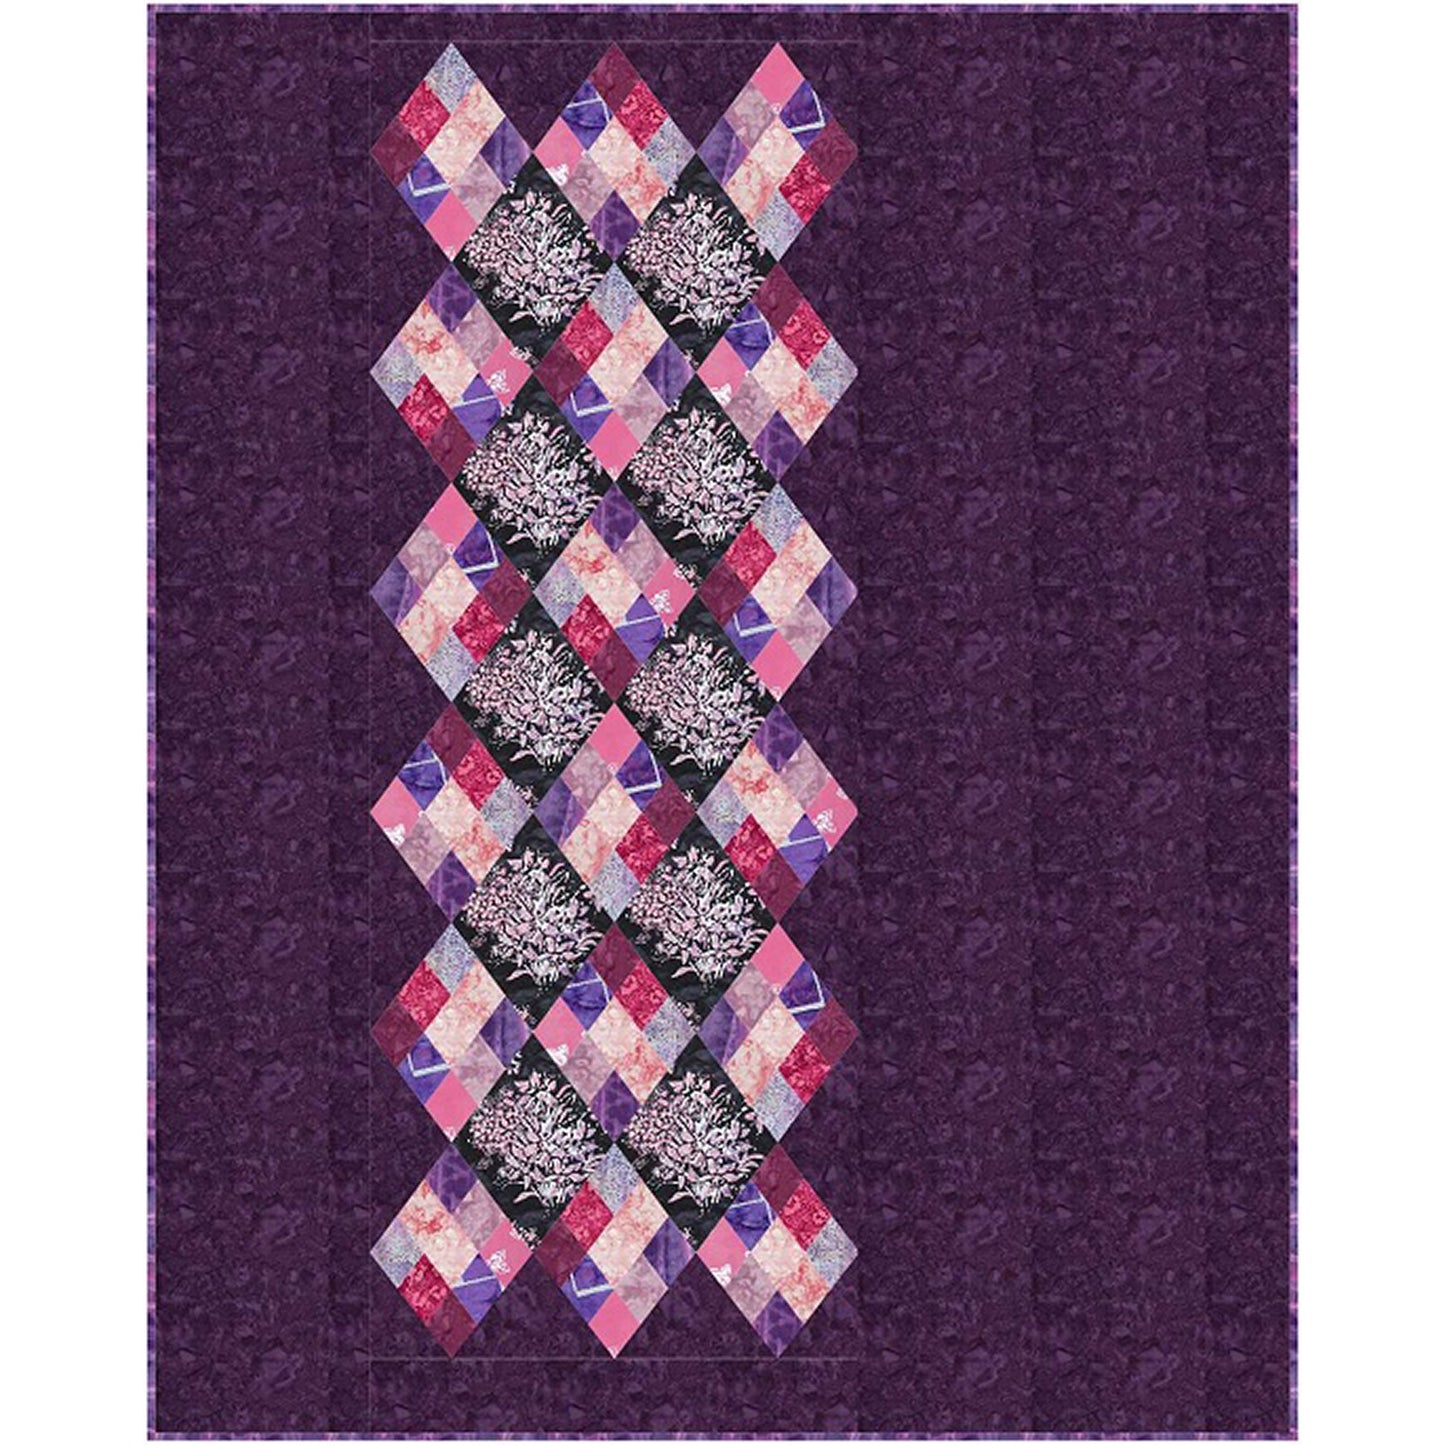 Colorful quilt with purple and pink diamond pattern on a purple background.